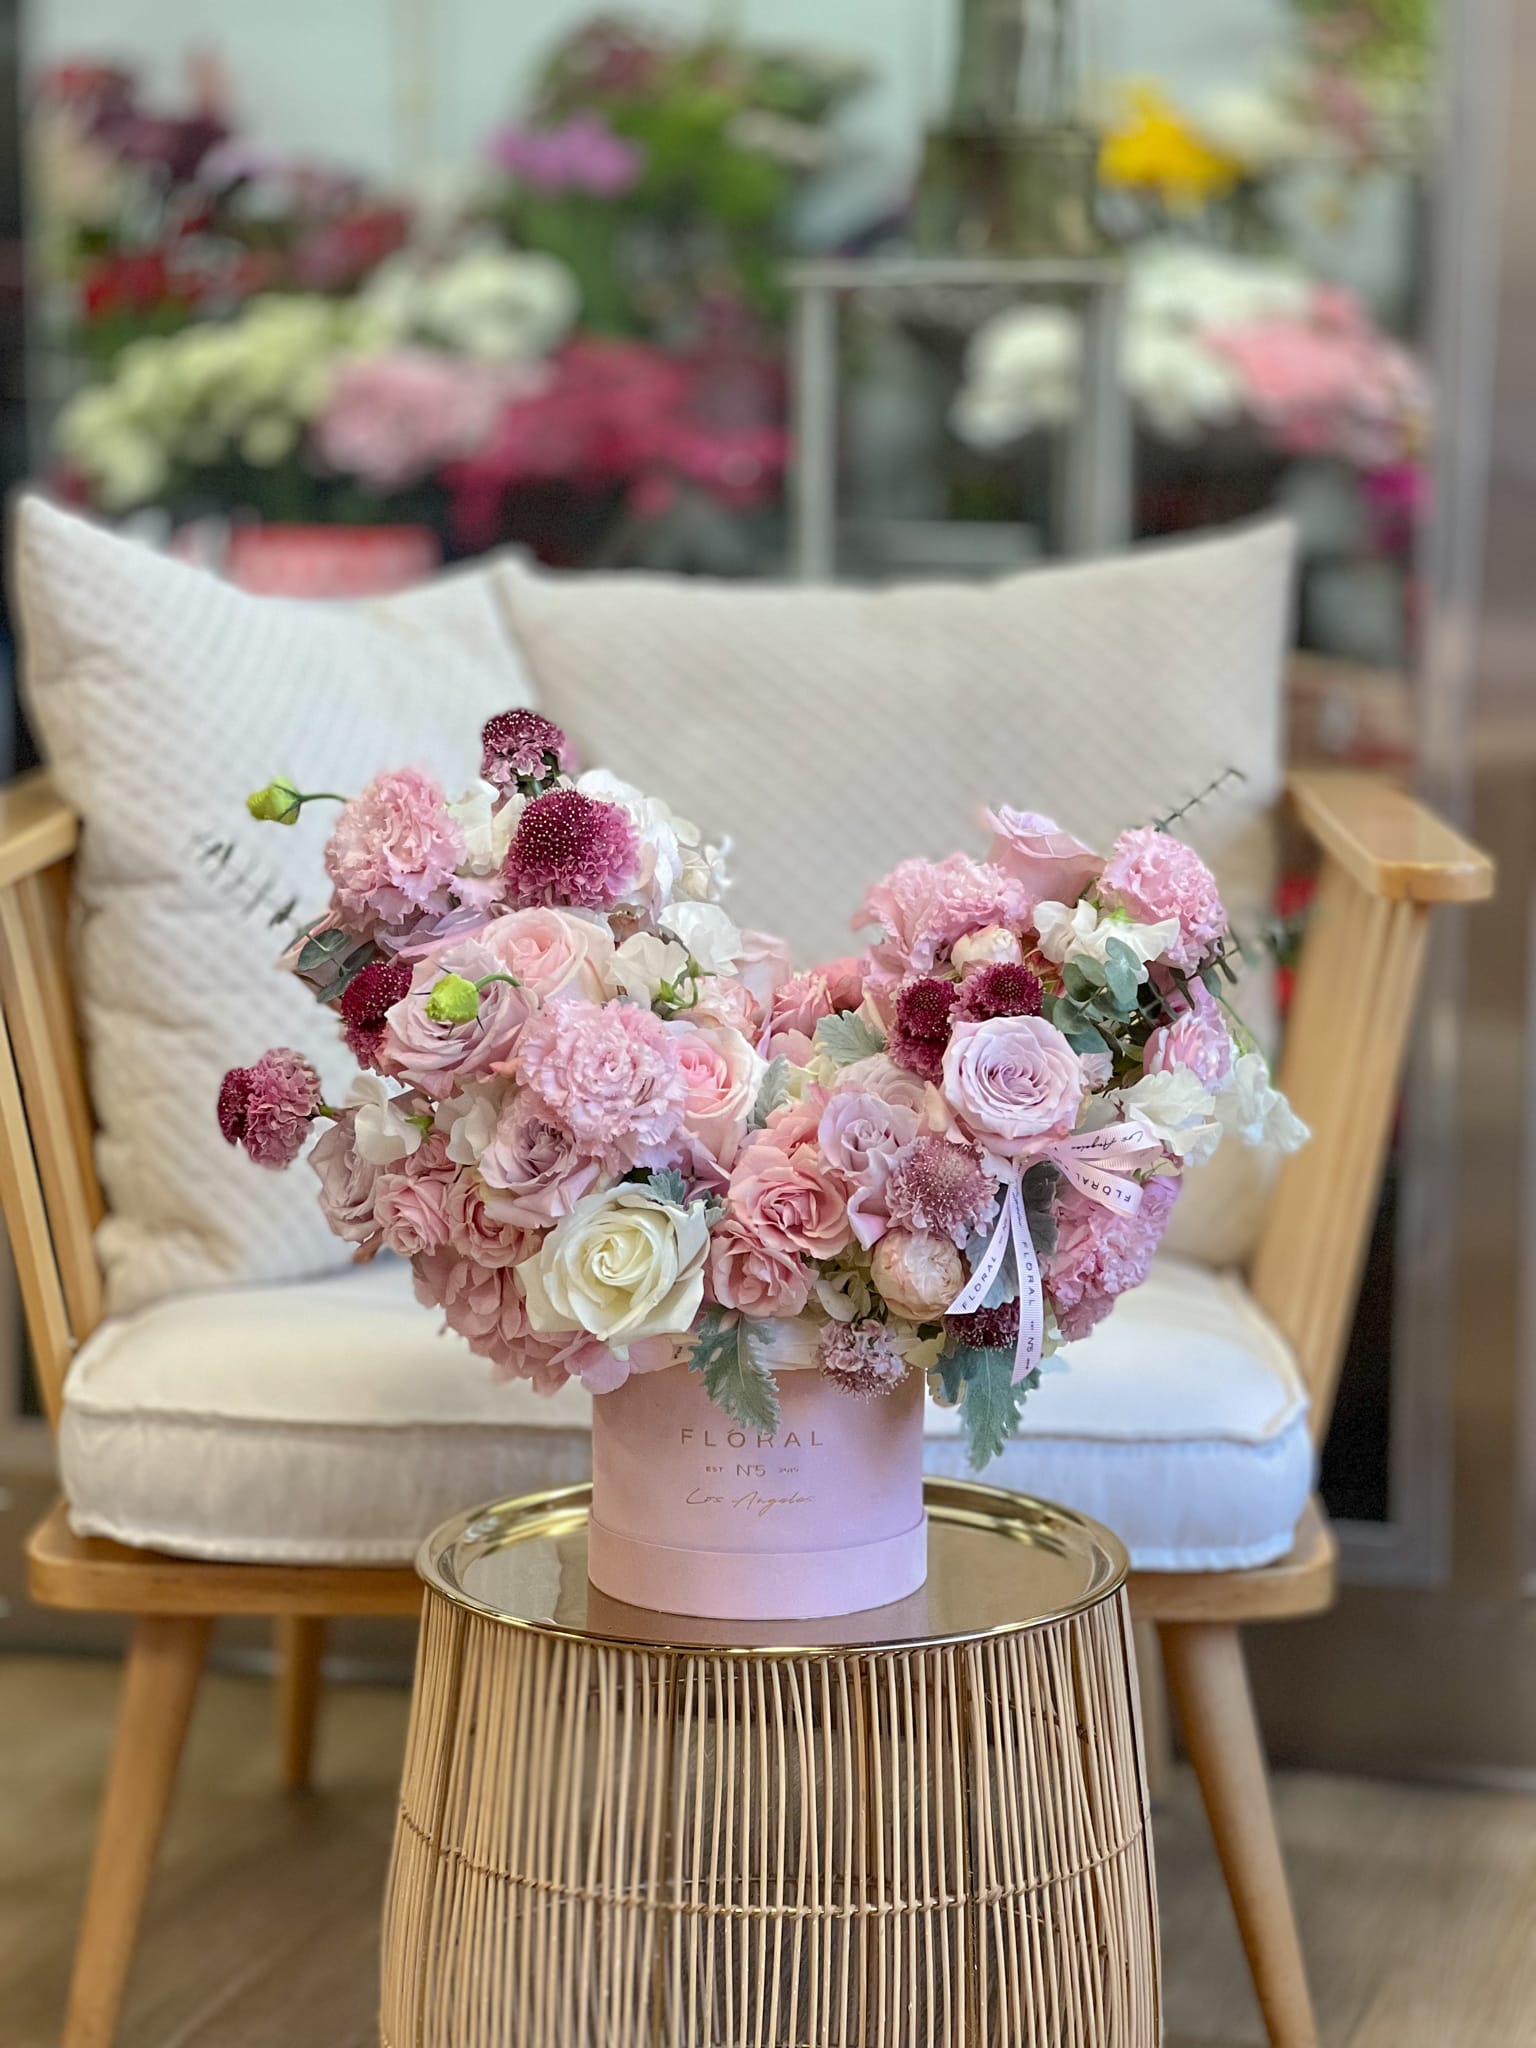 No.704 - Sweetheart - Just fabulous! A pink box filled with Lisianthus, Sweet Eskimo Roses, Scabiosa, Eucalyptus and other flowers to complete the composition.   Available in three sizes and diverse box textures and colors. On the photo: Size-Standard, Box Material - Velvet, Box Color - Pink.